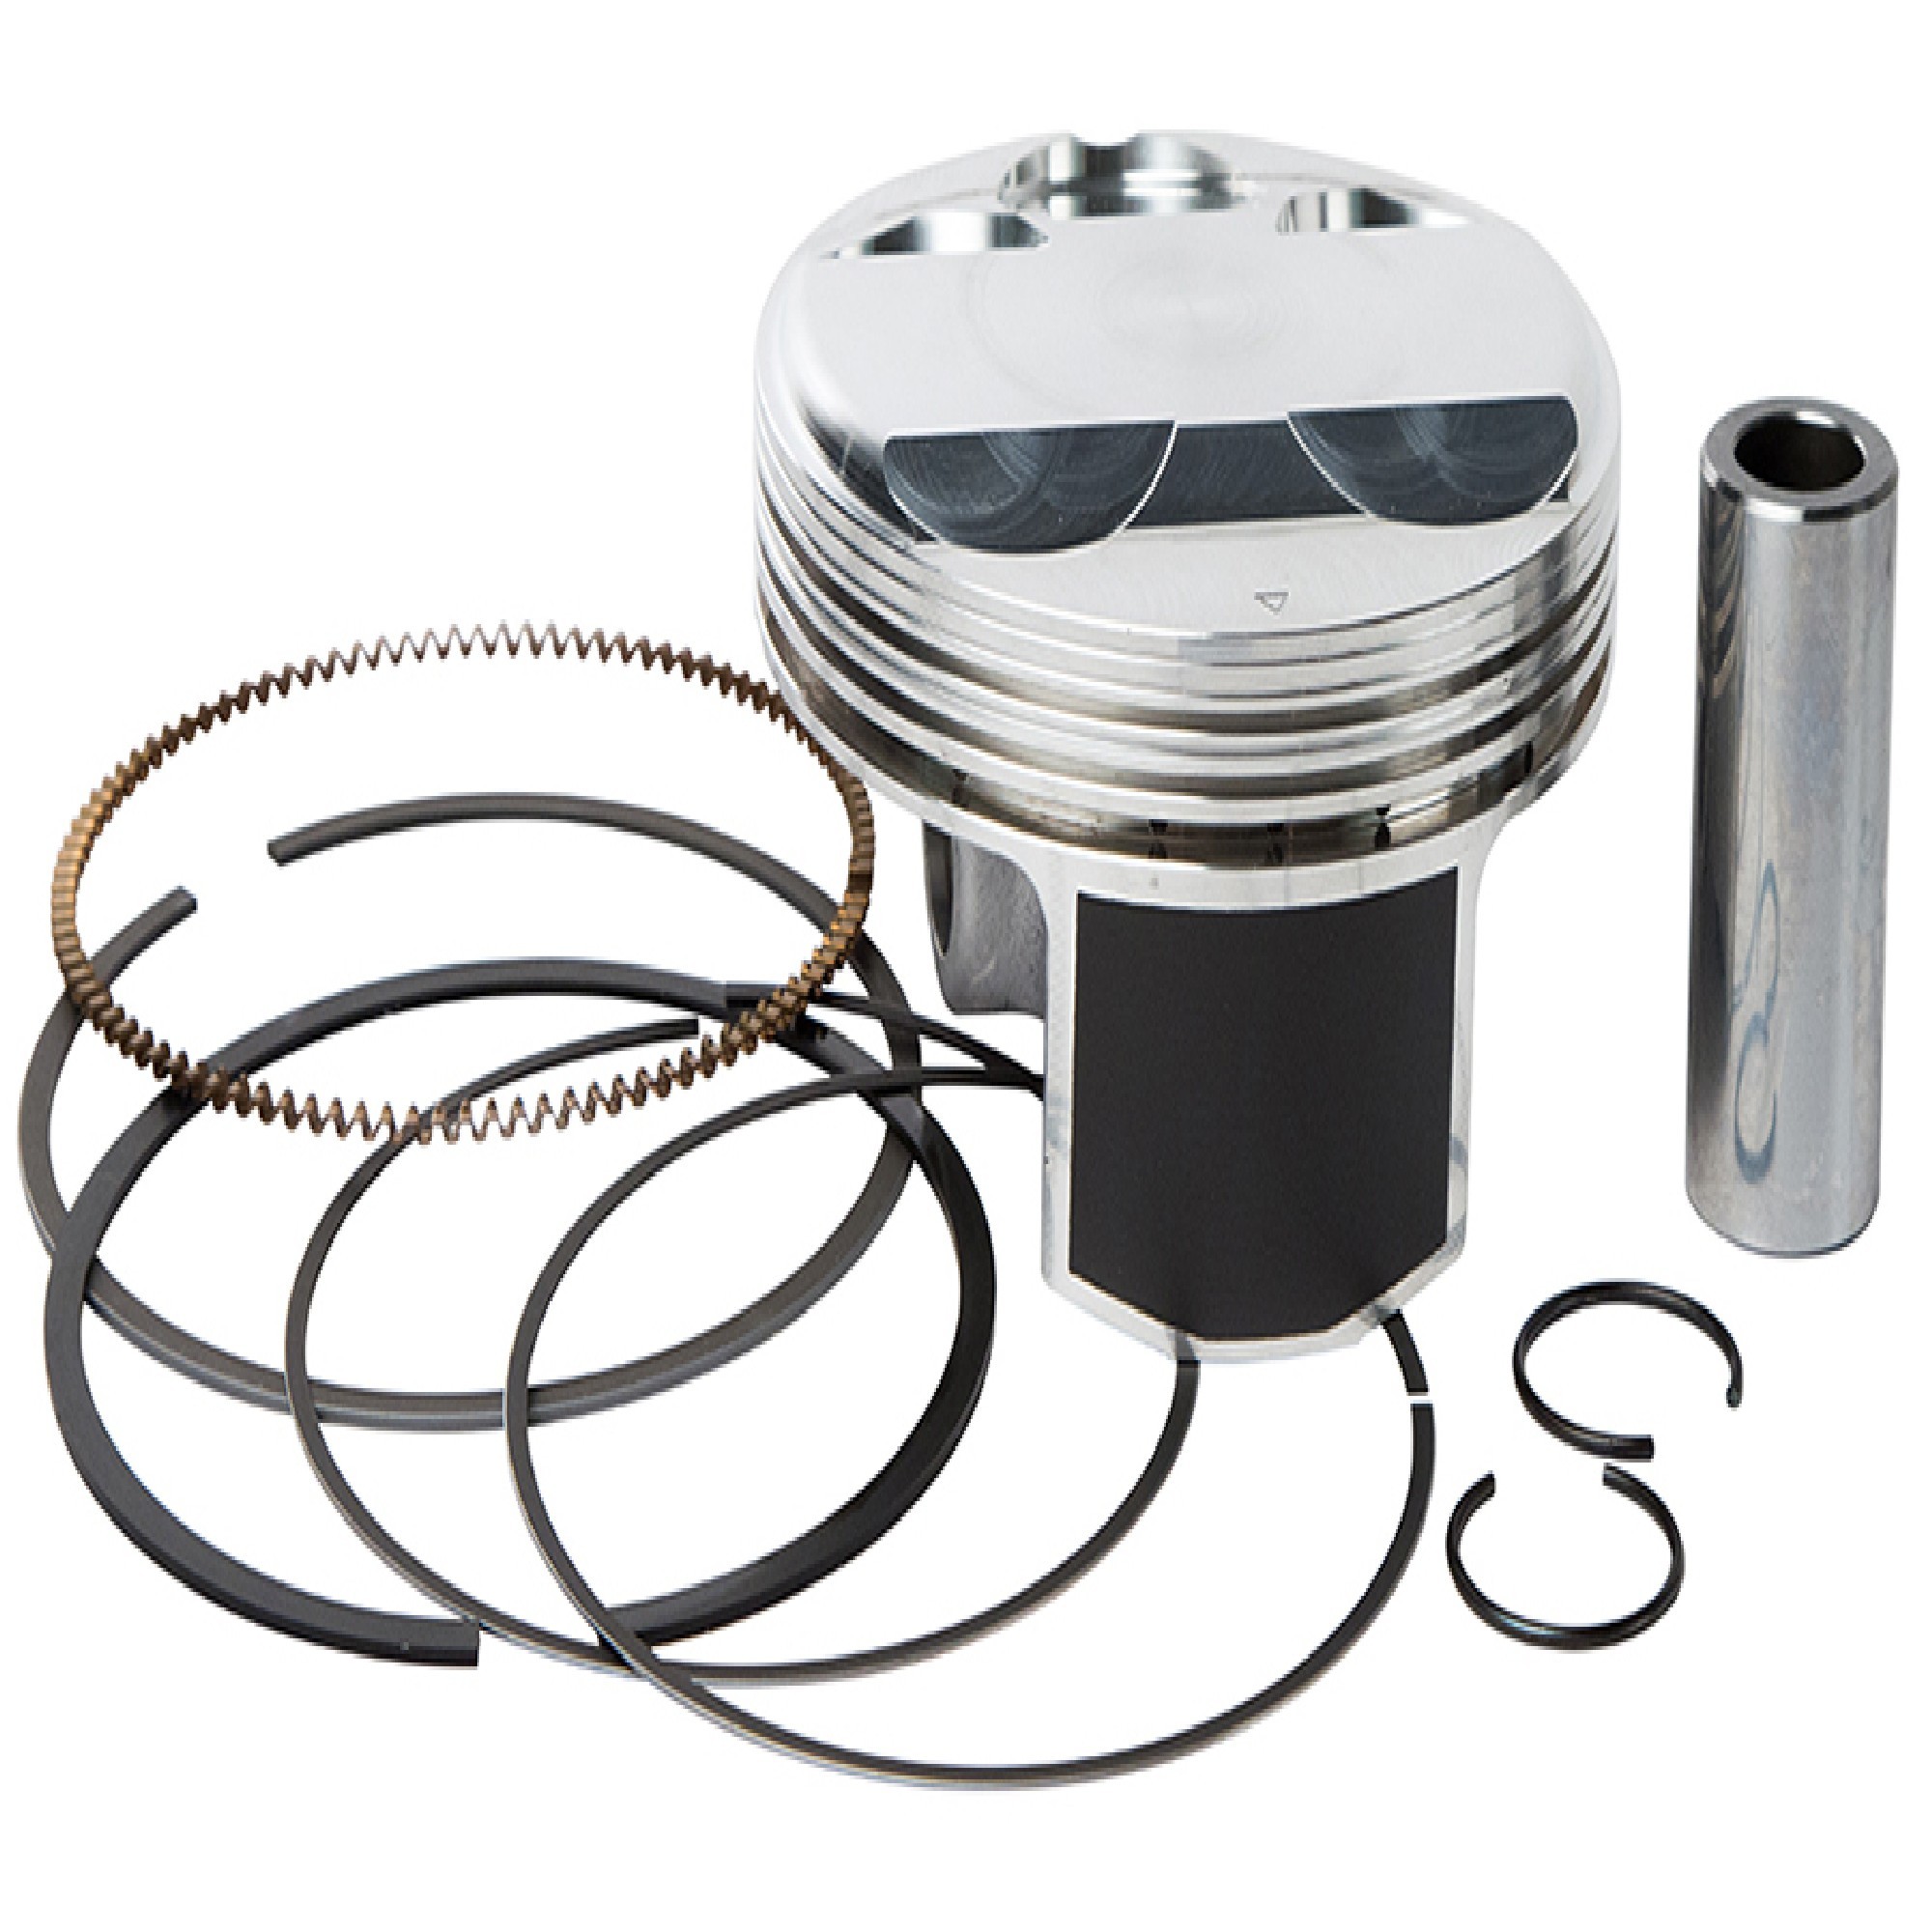 Vertex High Comp Forged Piston Kit for Yamaha YFM 660 F Grizzly 4x4 (02-08)